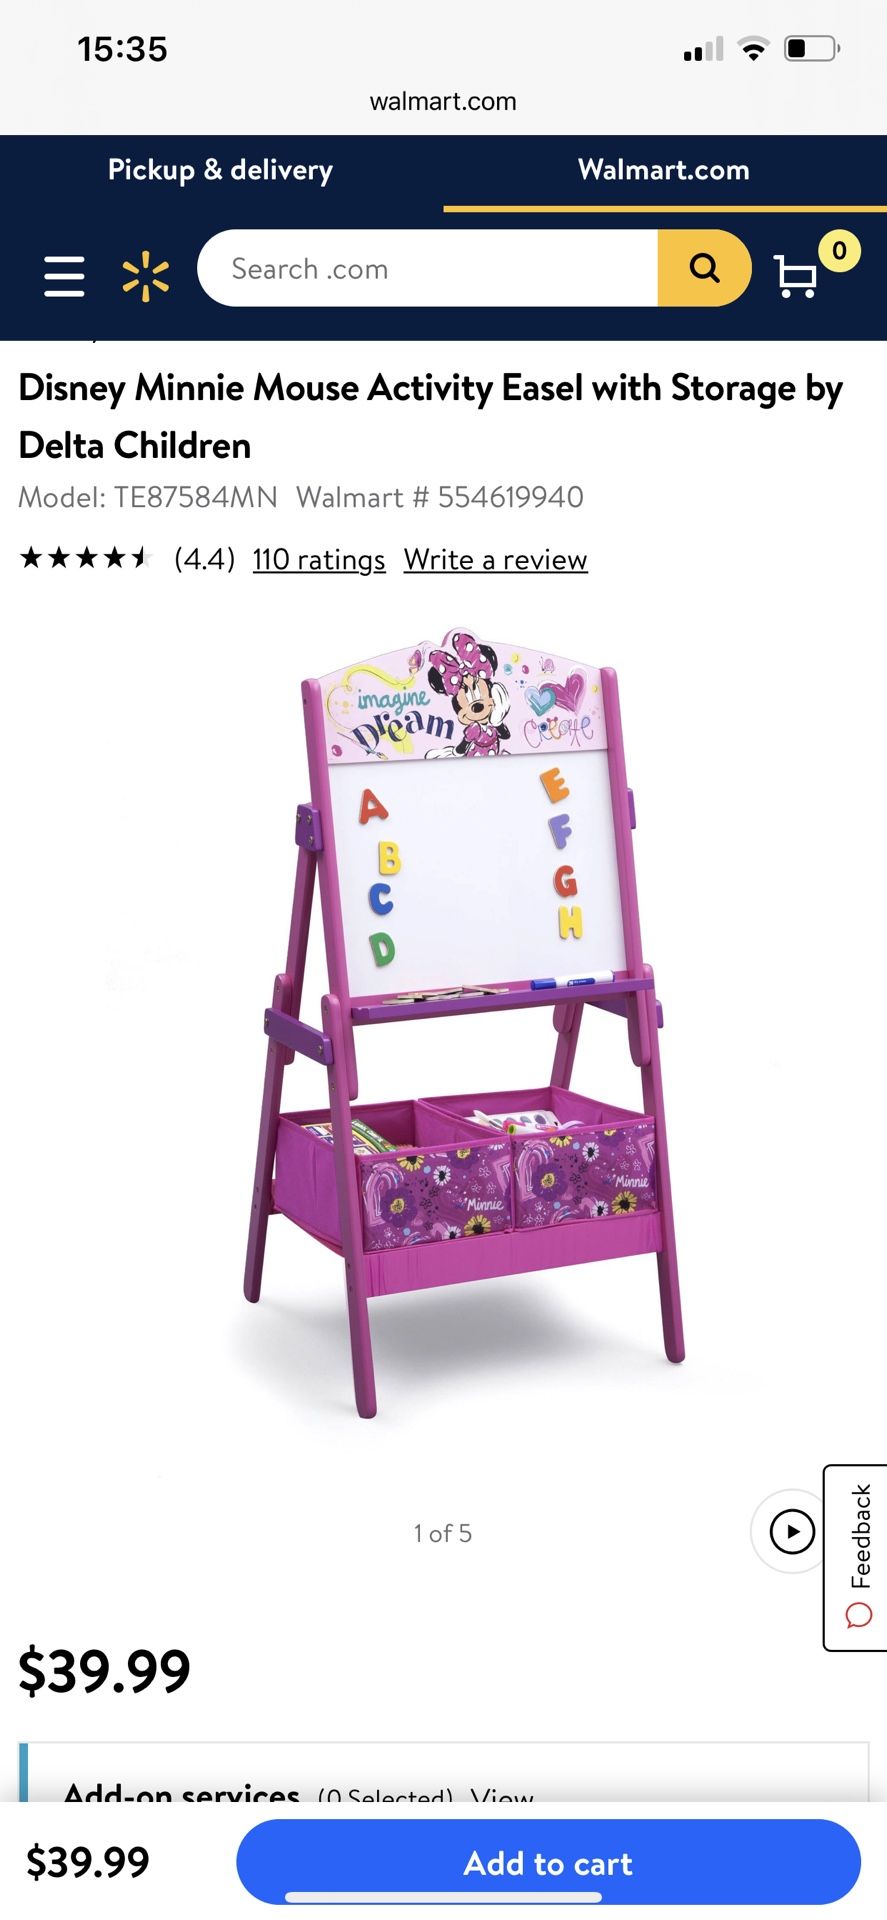 Delta Minnie Mouse Easel With Storage